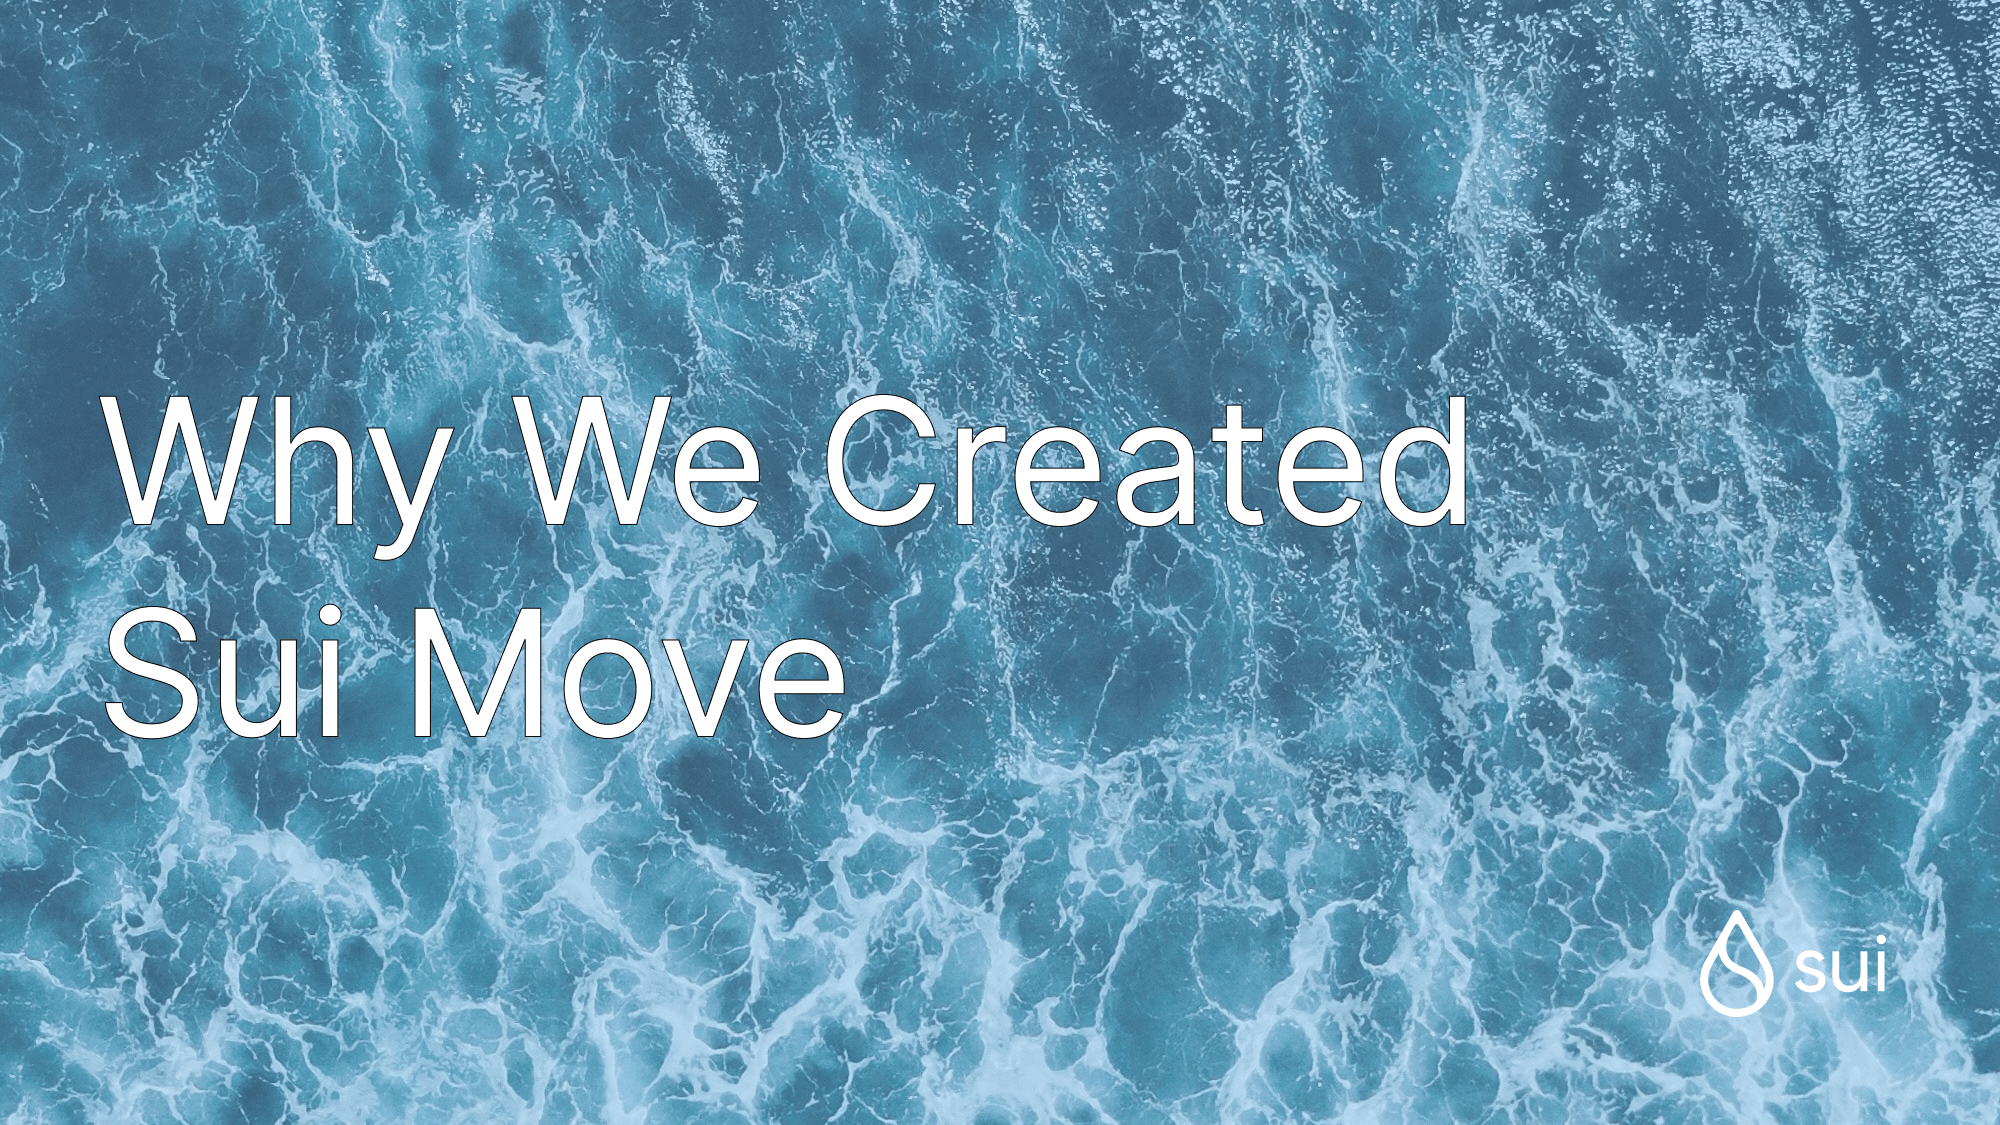 Why We Created Sui Move